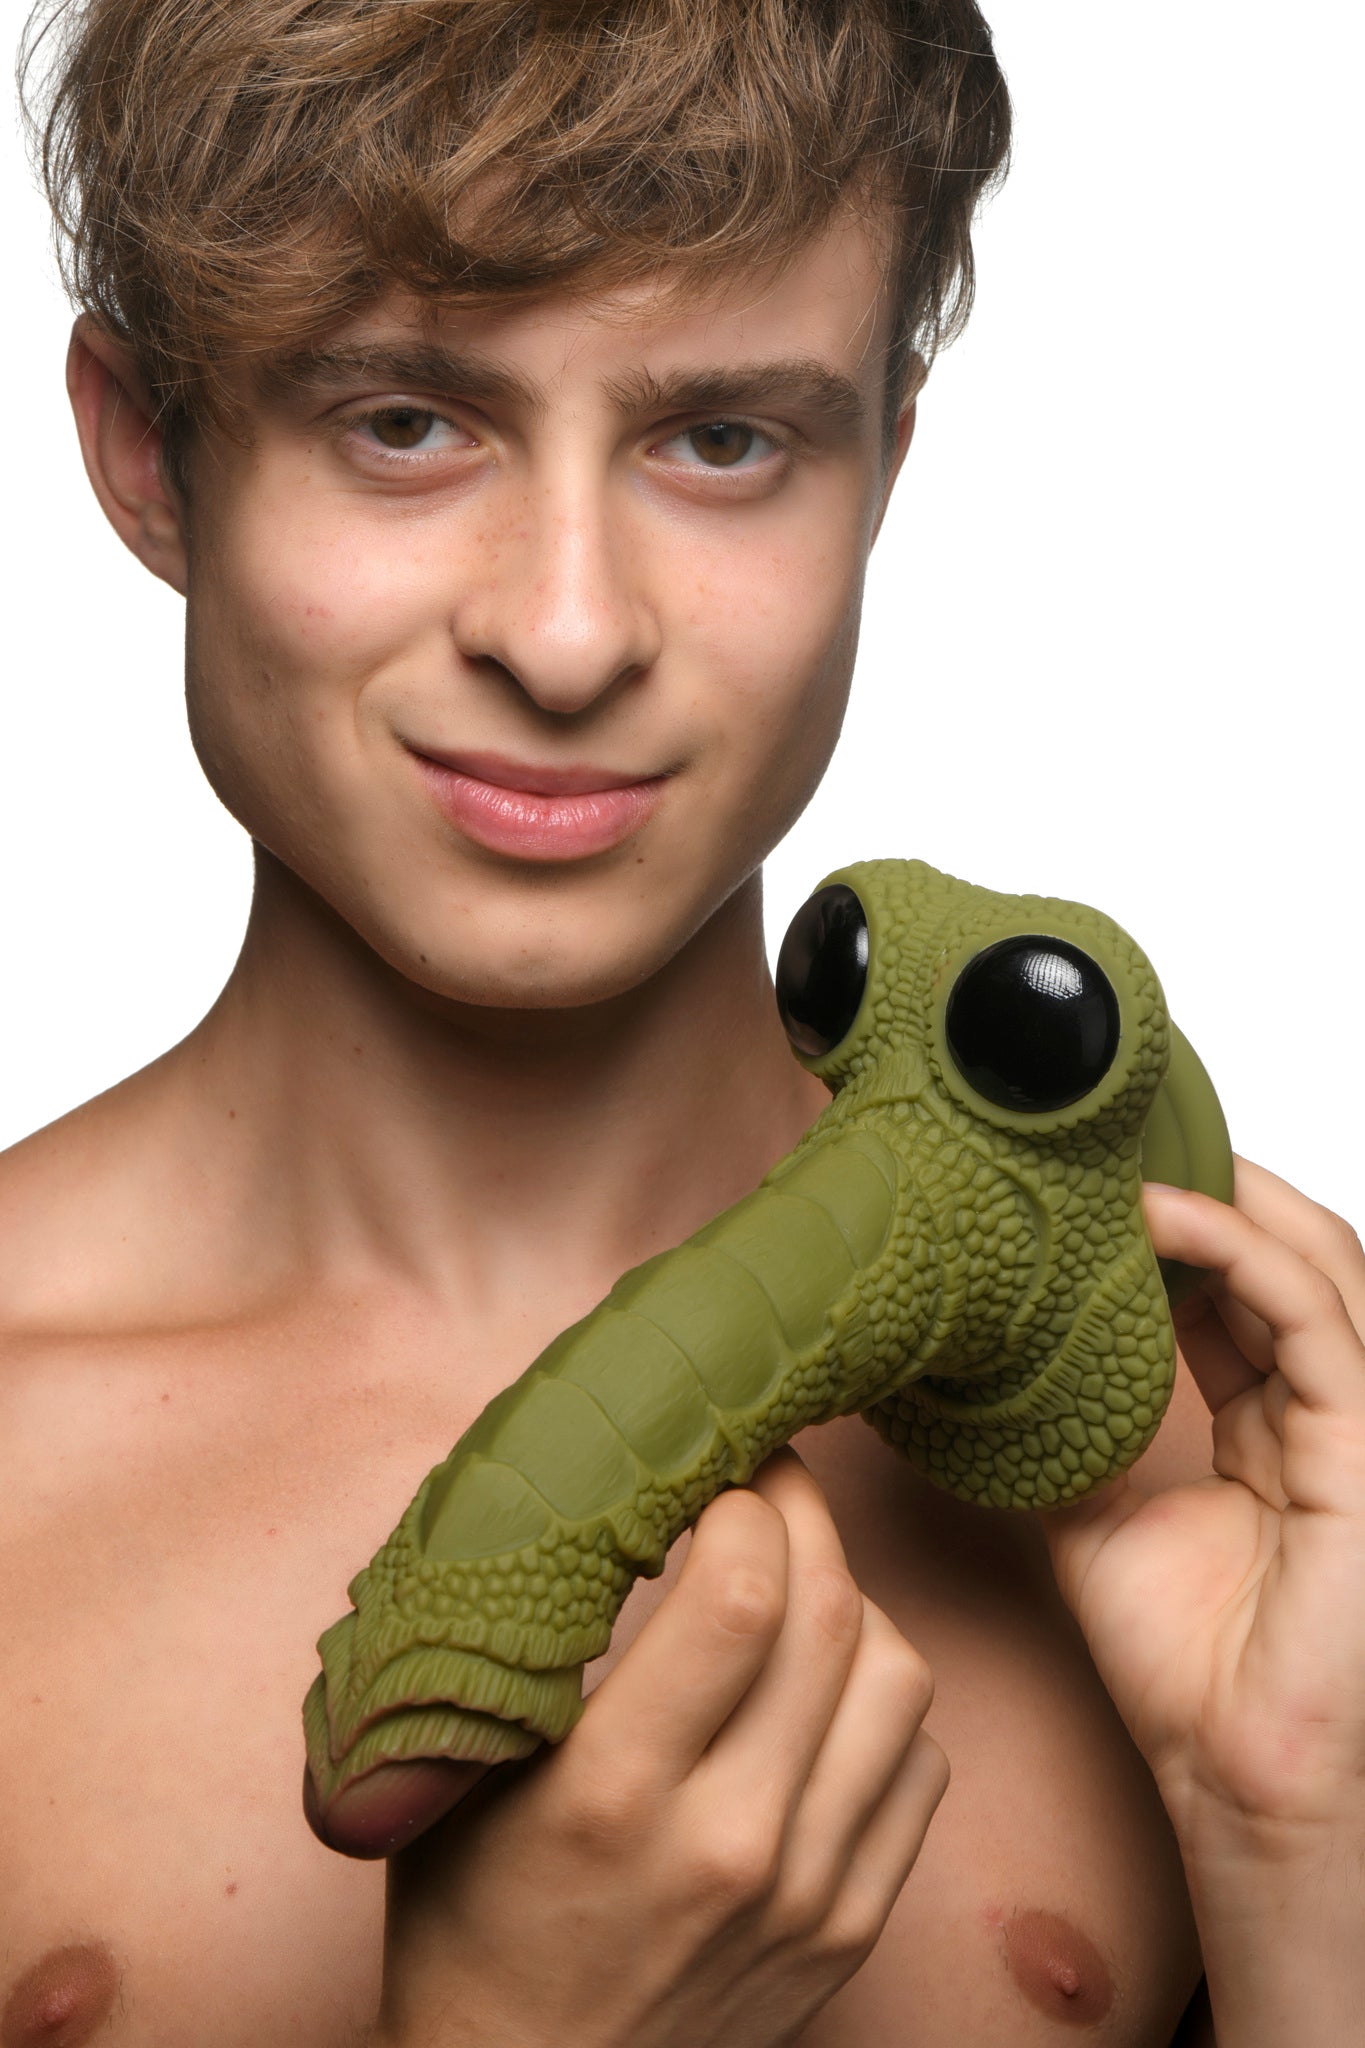 Creature Cocks Swamp Monster Green Scaly Silicone Dildo